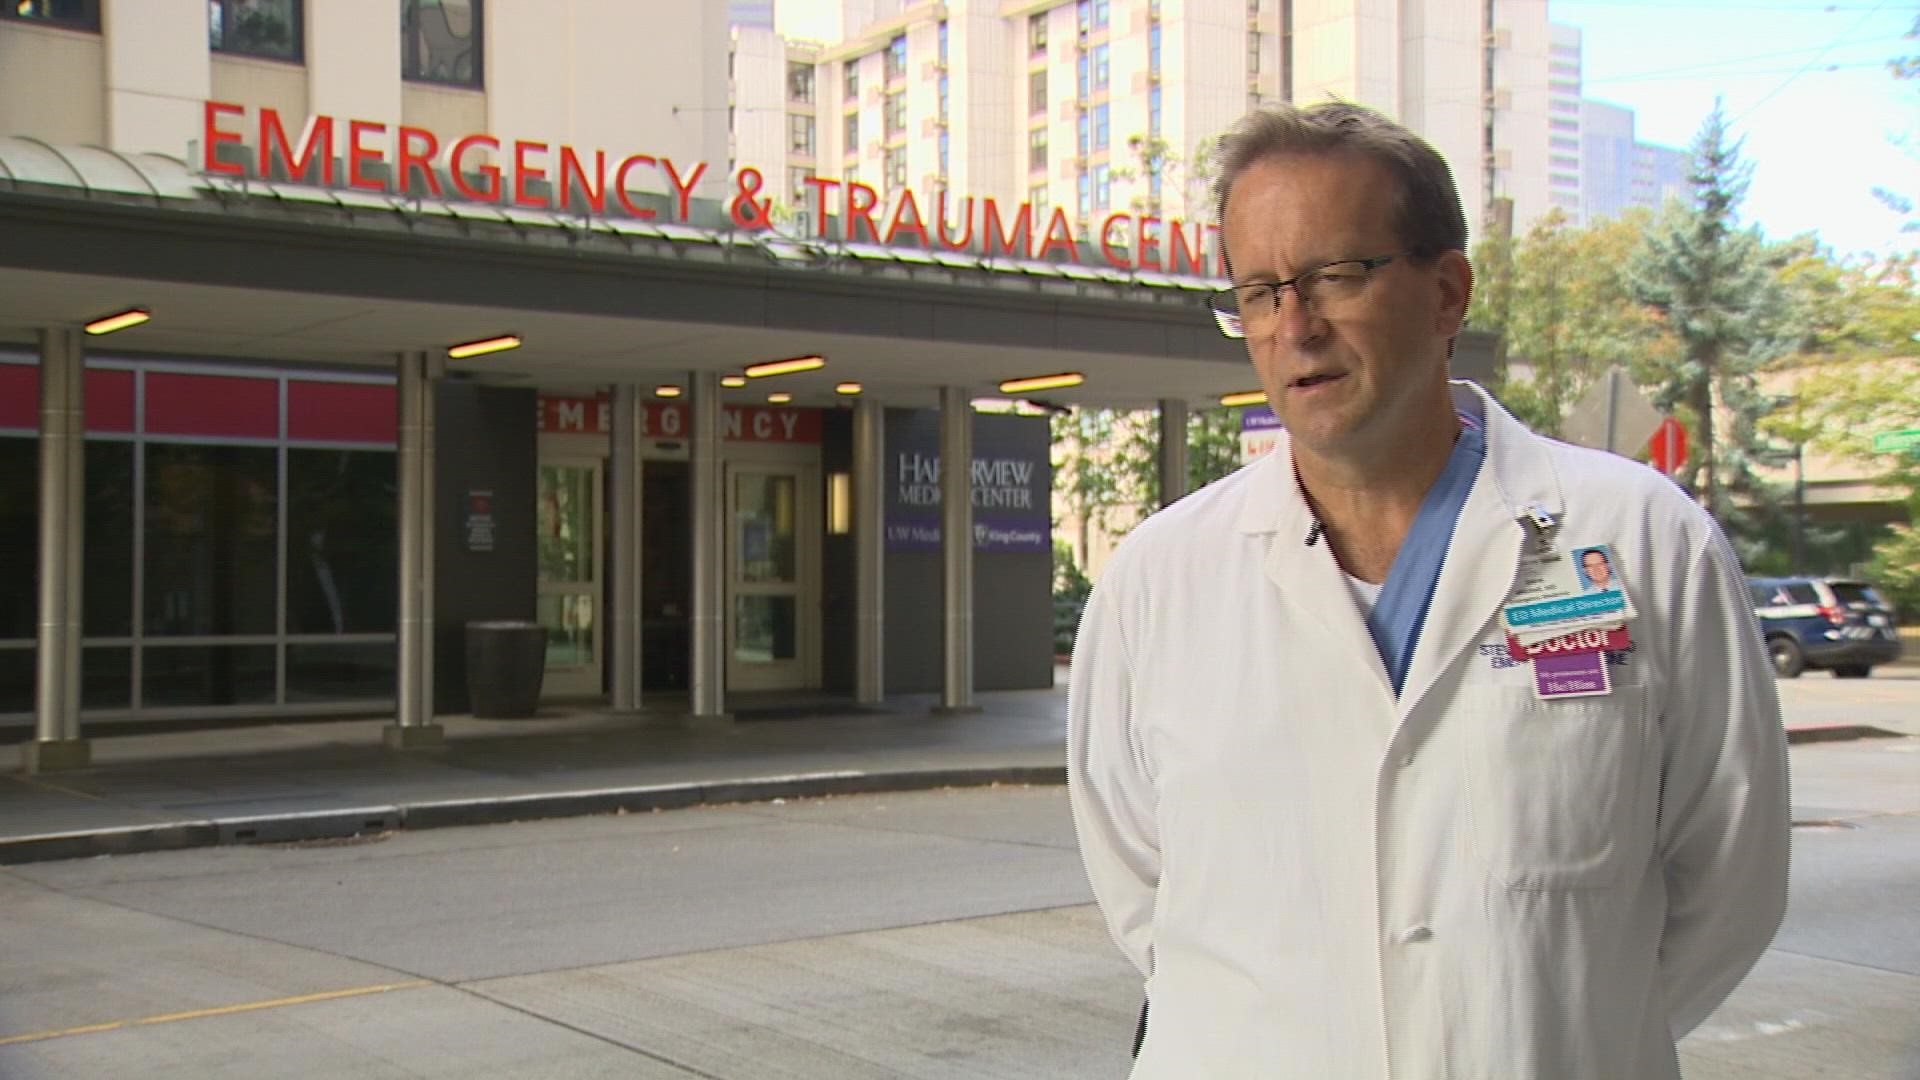 Dr. Steve Mitchell, Medical Director for the Emergency Department at Harborview Medical Center, talks about incoming traumas during a busy night.